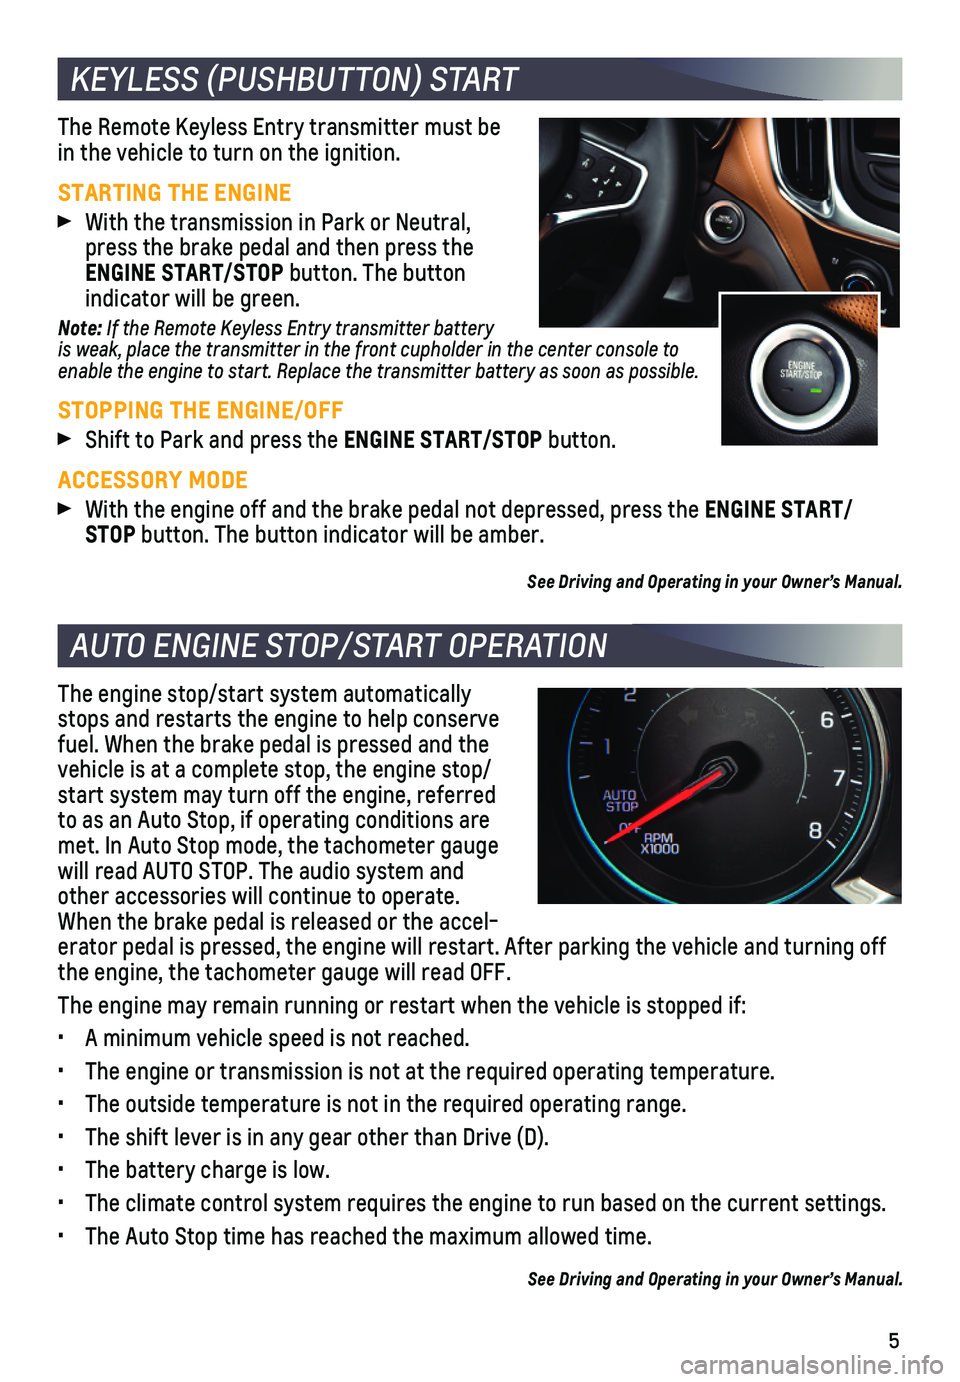 CHEVROLET EQUINOX 2020  Get To Know Guide 5
The Remote Keyless Entry transmitter must be in the vehicle to turn on the ignition.
STARTING THE ENGINE With the transmission in Park or Neutral, press the brake pedal and then press the ENGINE STA